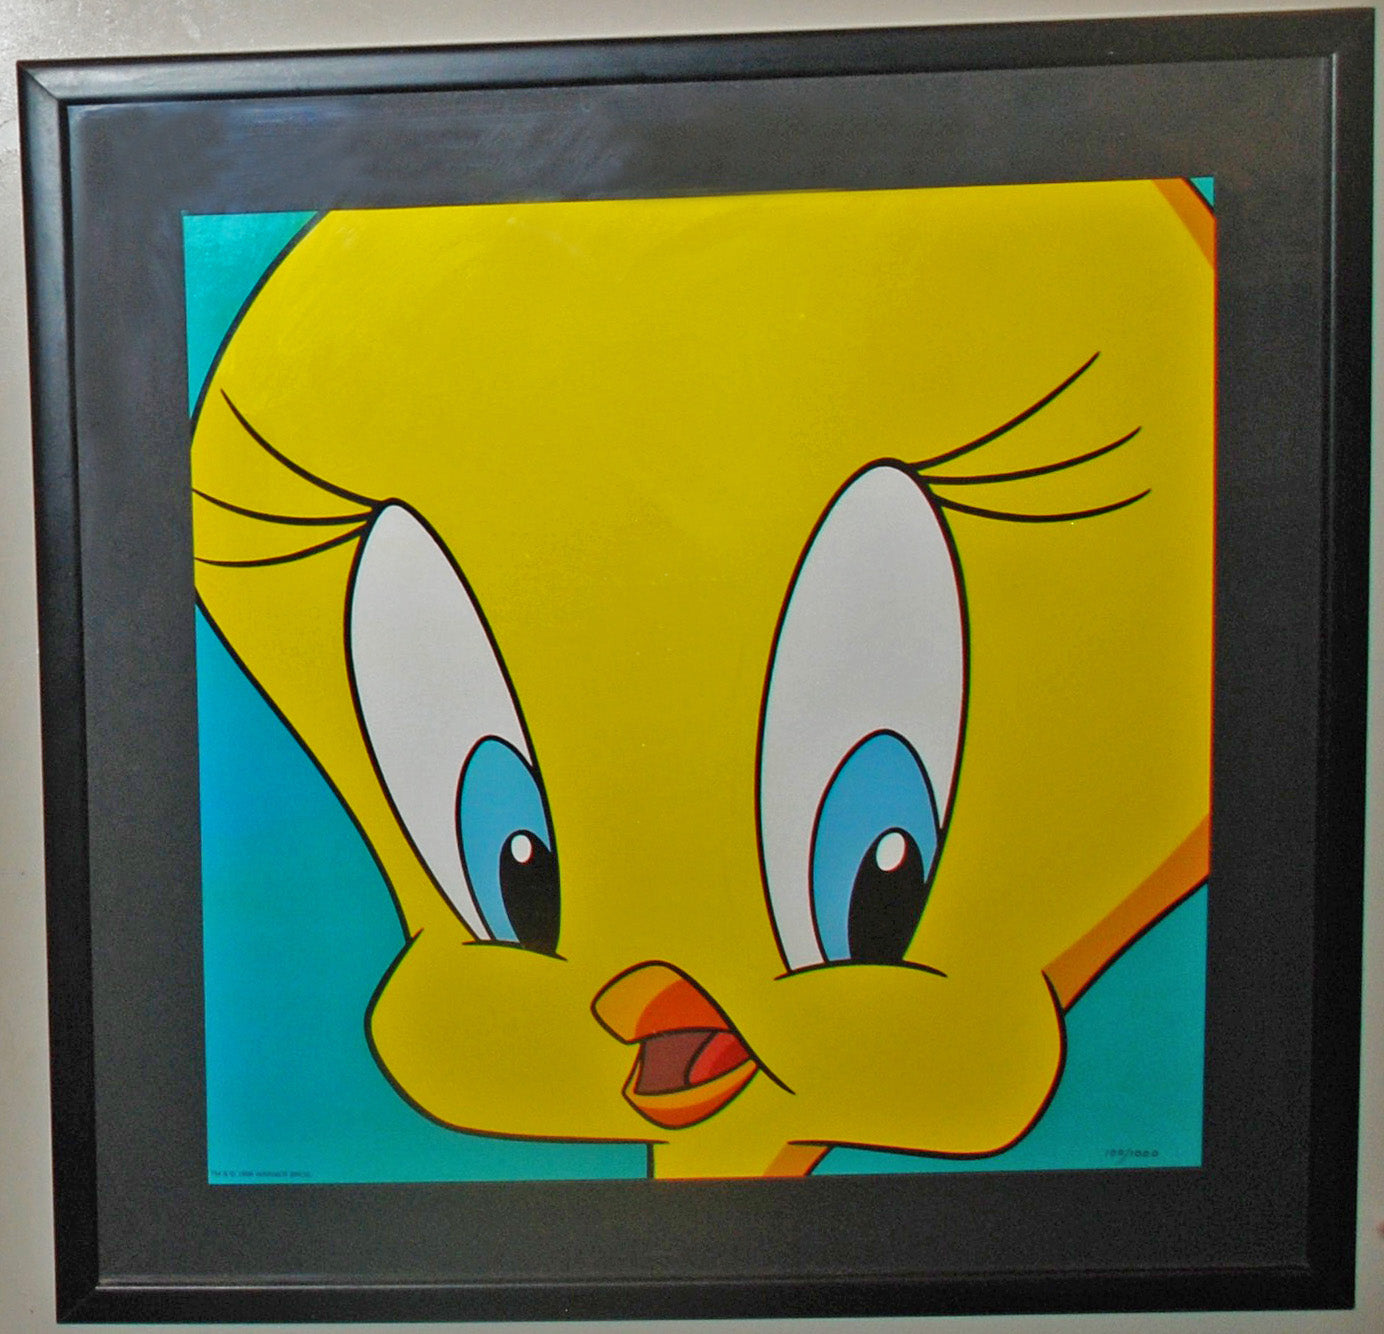 Original Warner Brothers Limited Edition Lithograph Tweety